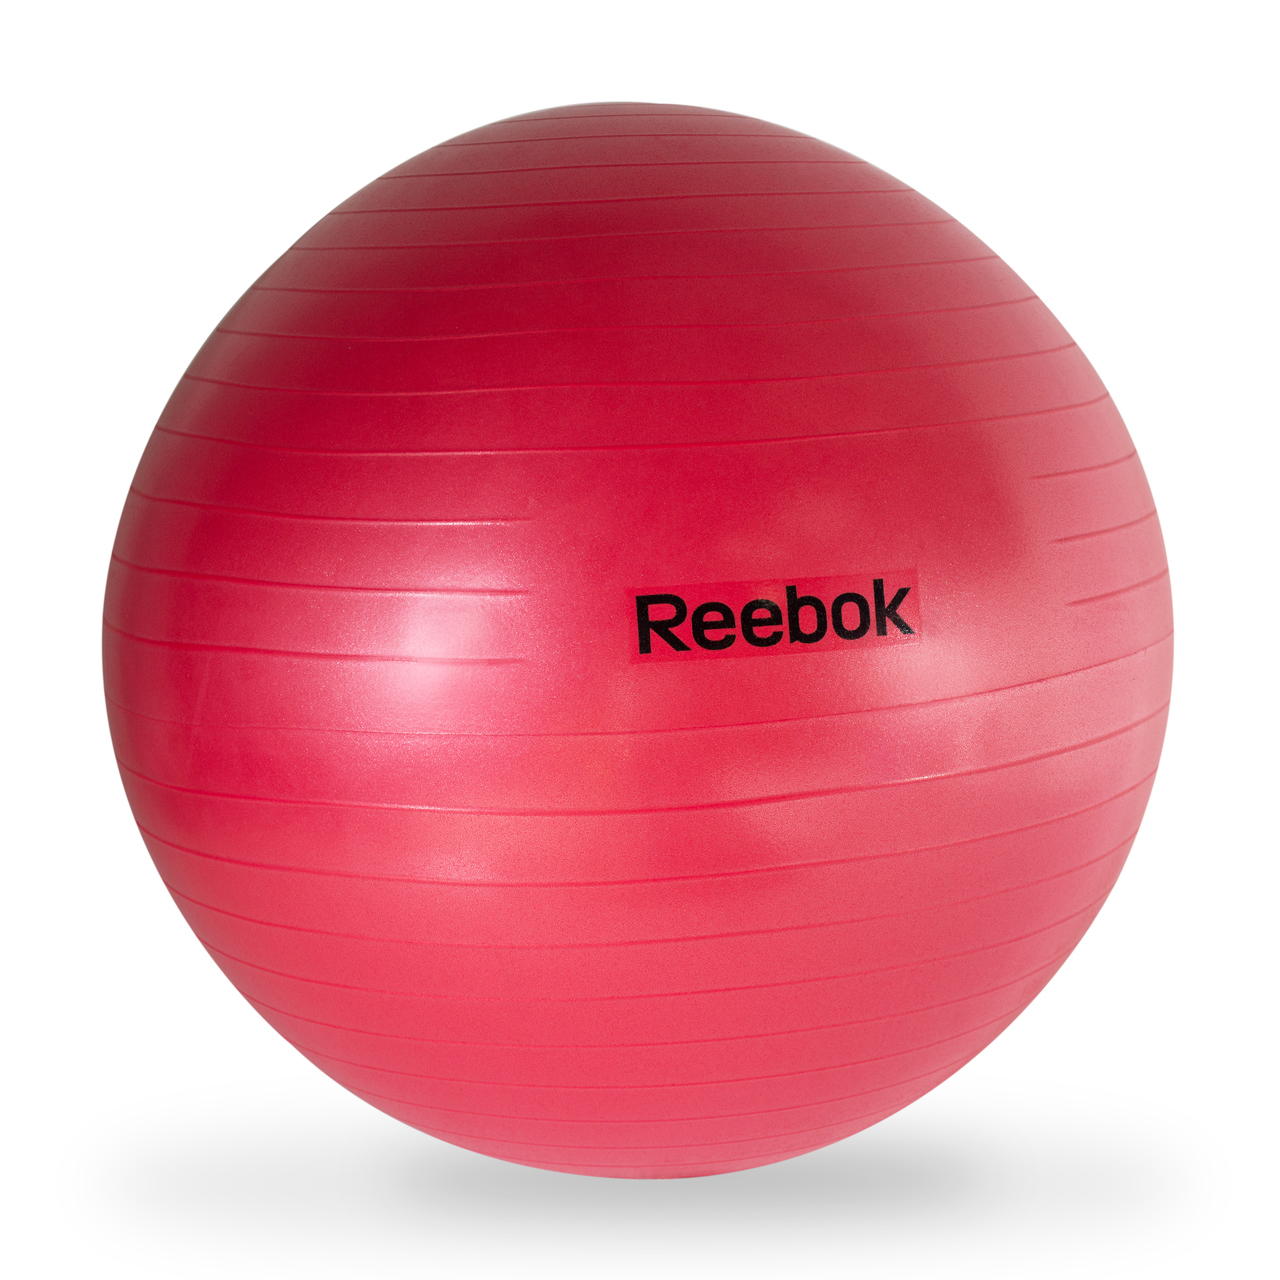 30 Minute Reebok stability ball workout for Build Muscle